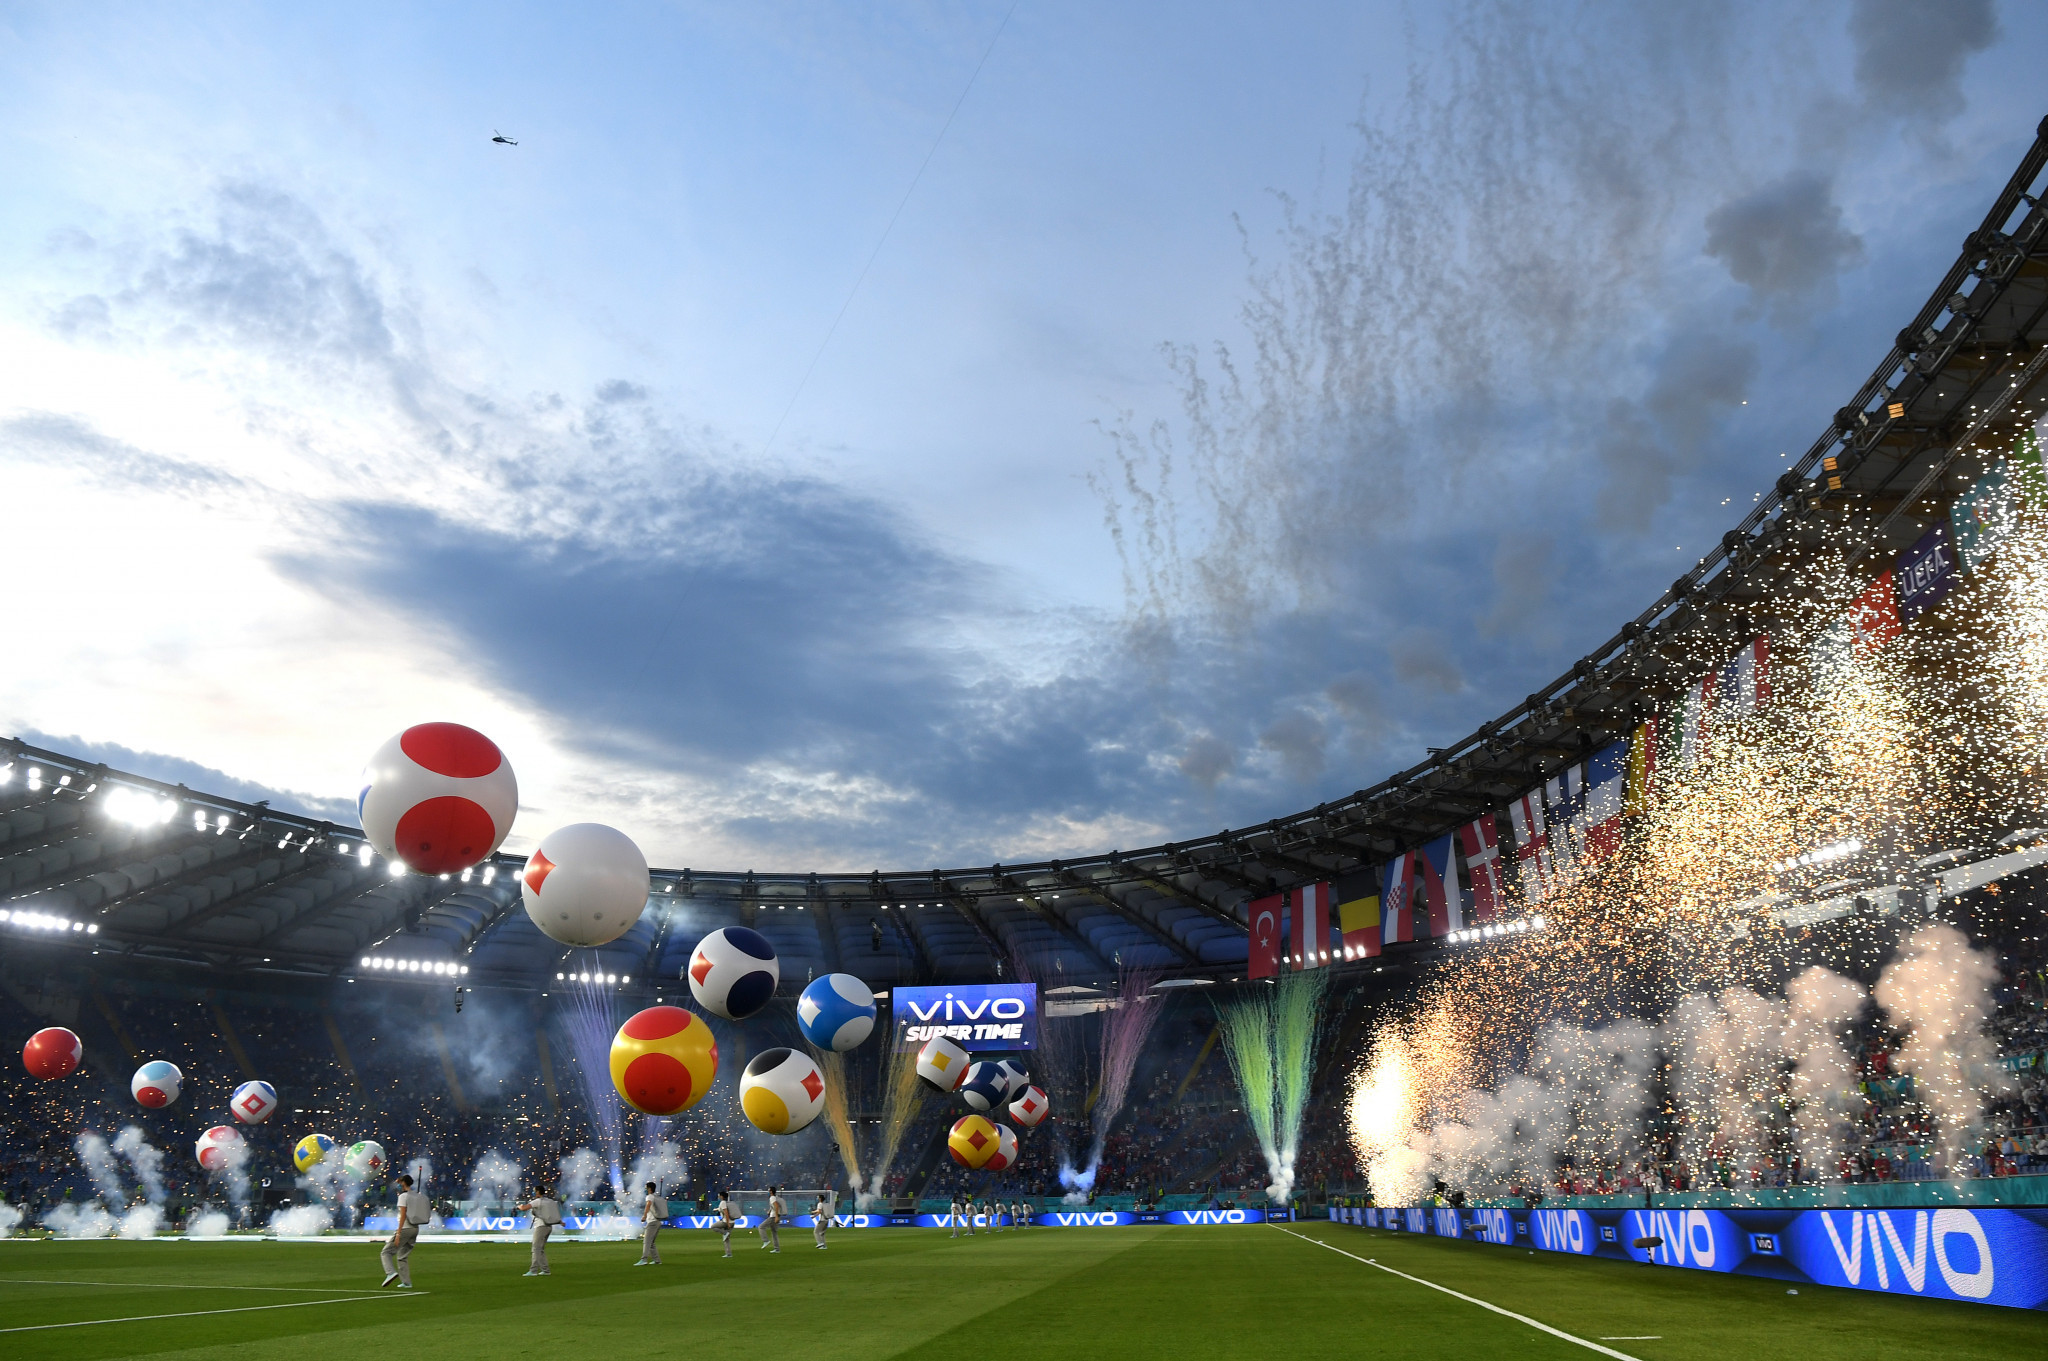 Italy opts to focus on Euro 2032 bid to allow more time for stadium improvements